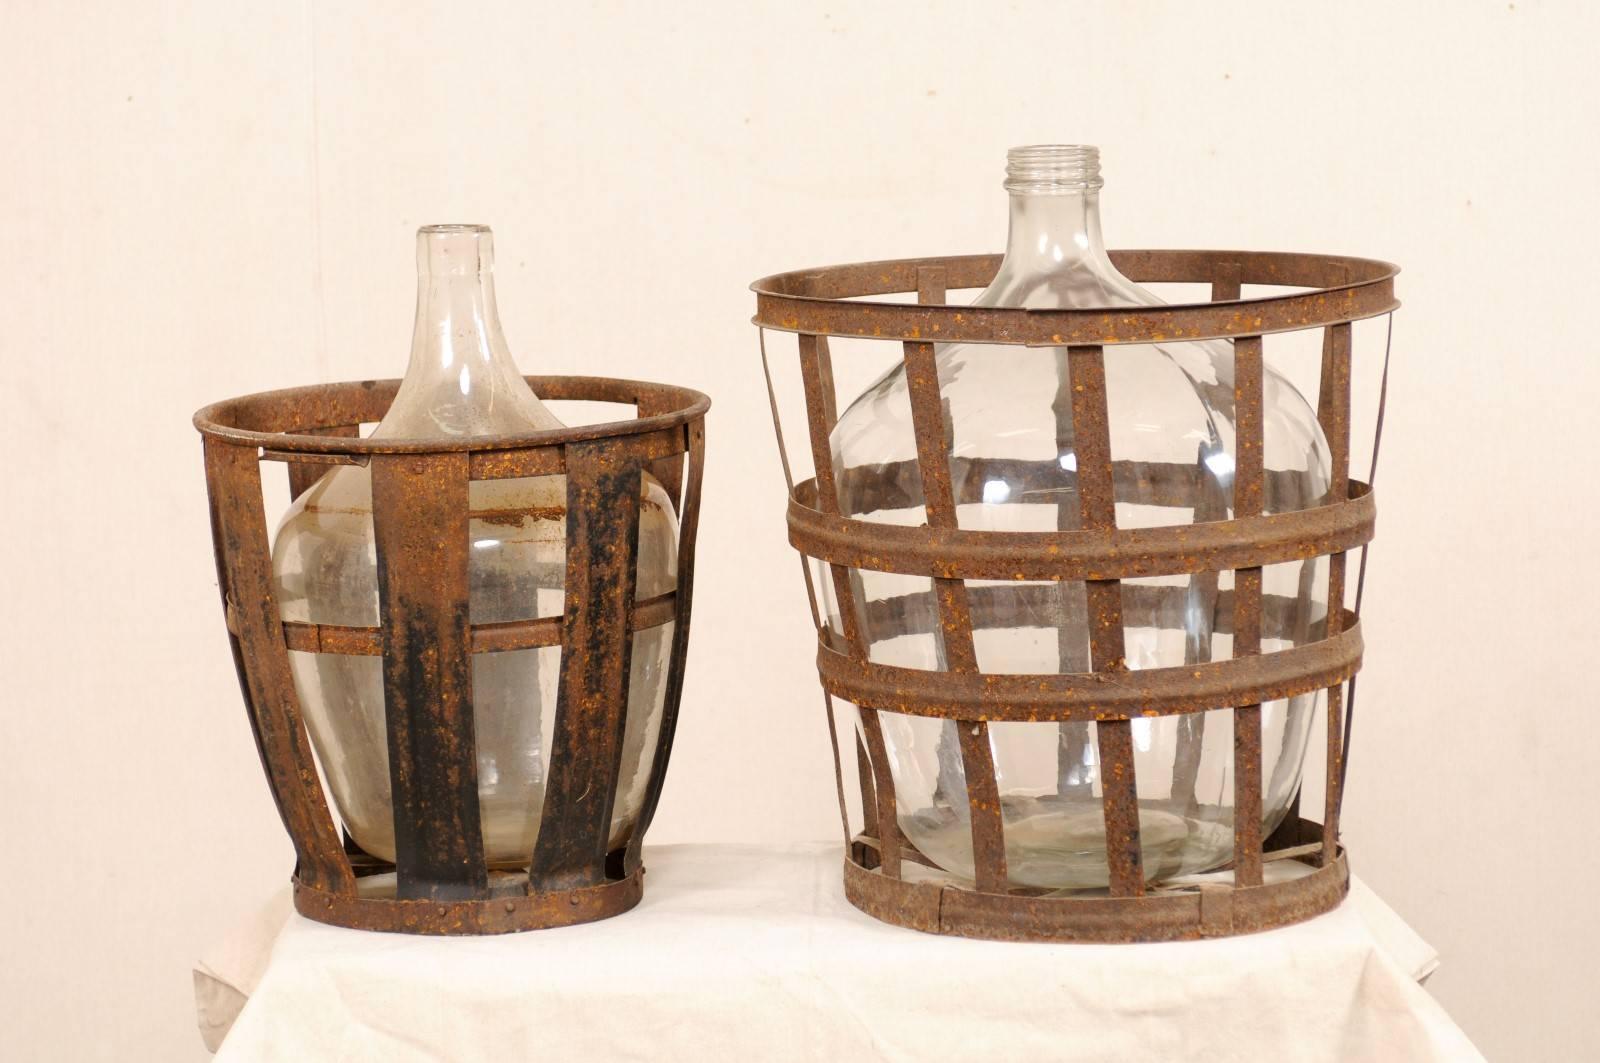 A pair of midcentury French vintner iron baskets with demijohn wine bottles. This is a pair of French vintner iron-woven baskets, each containing a clear, demijohn wine bottle. The baskets are nicely aged with lovely patina. These French vintner